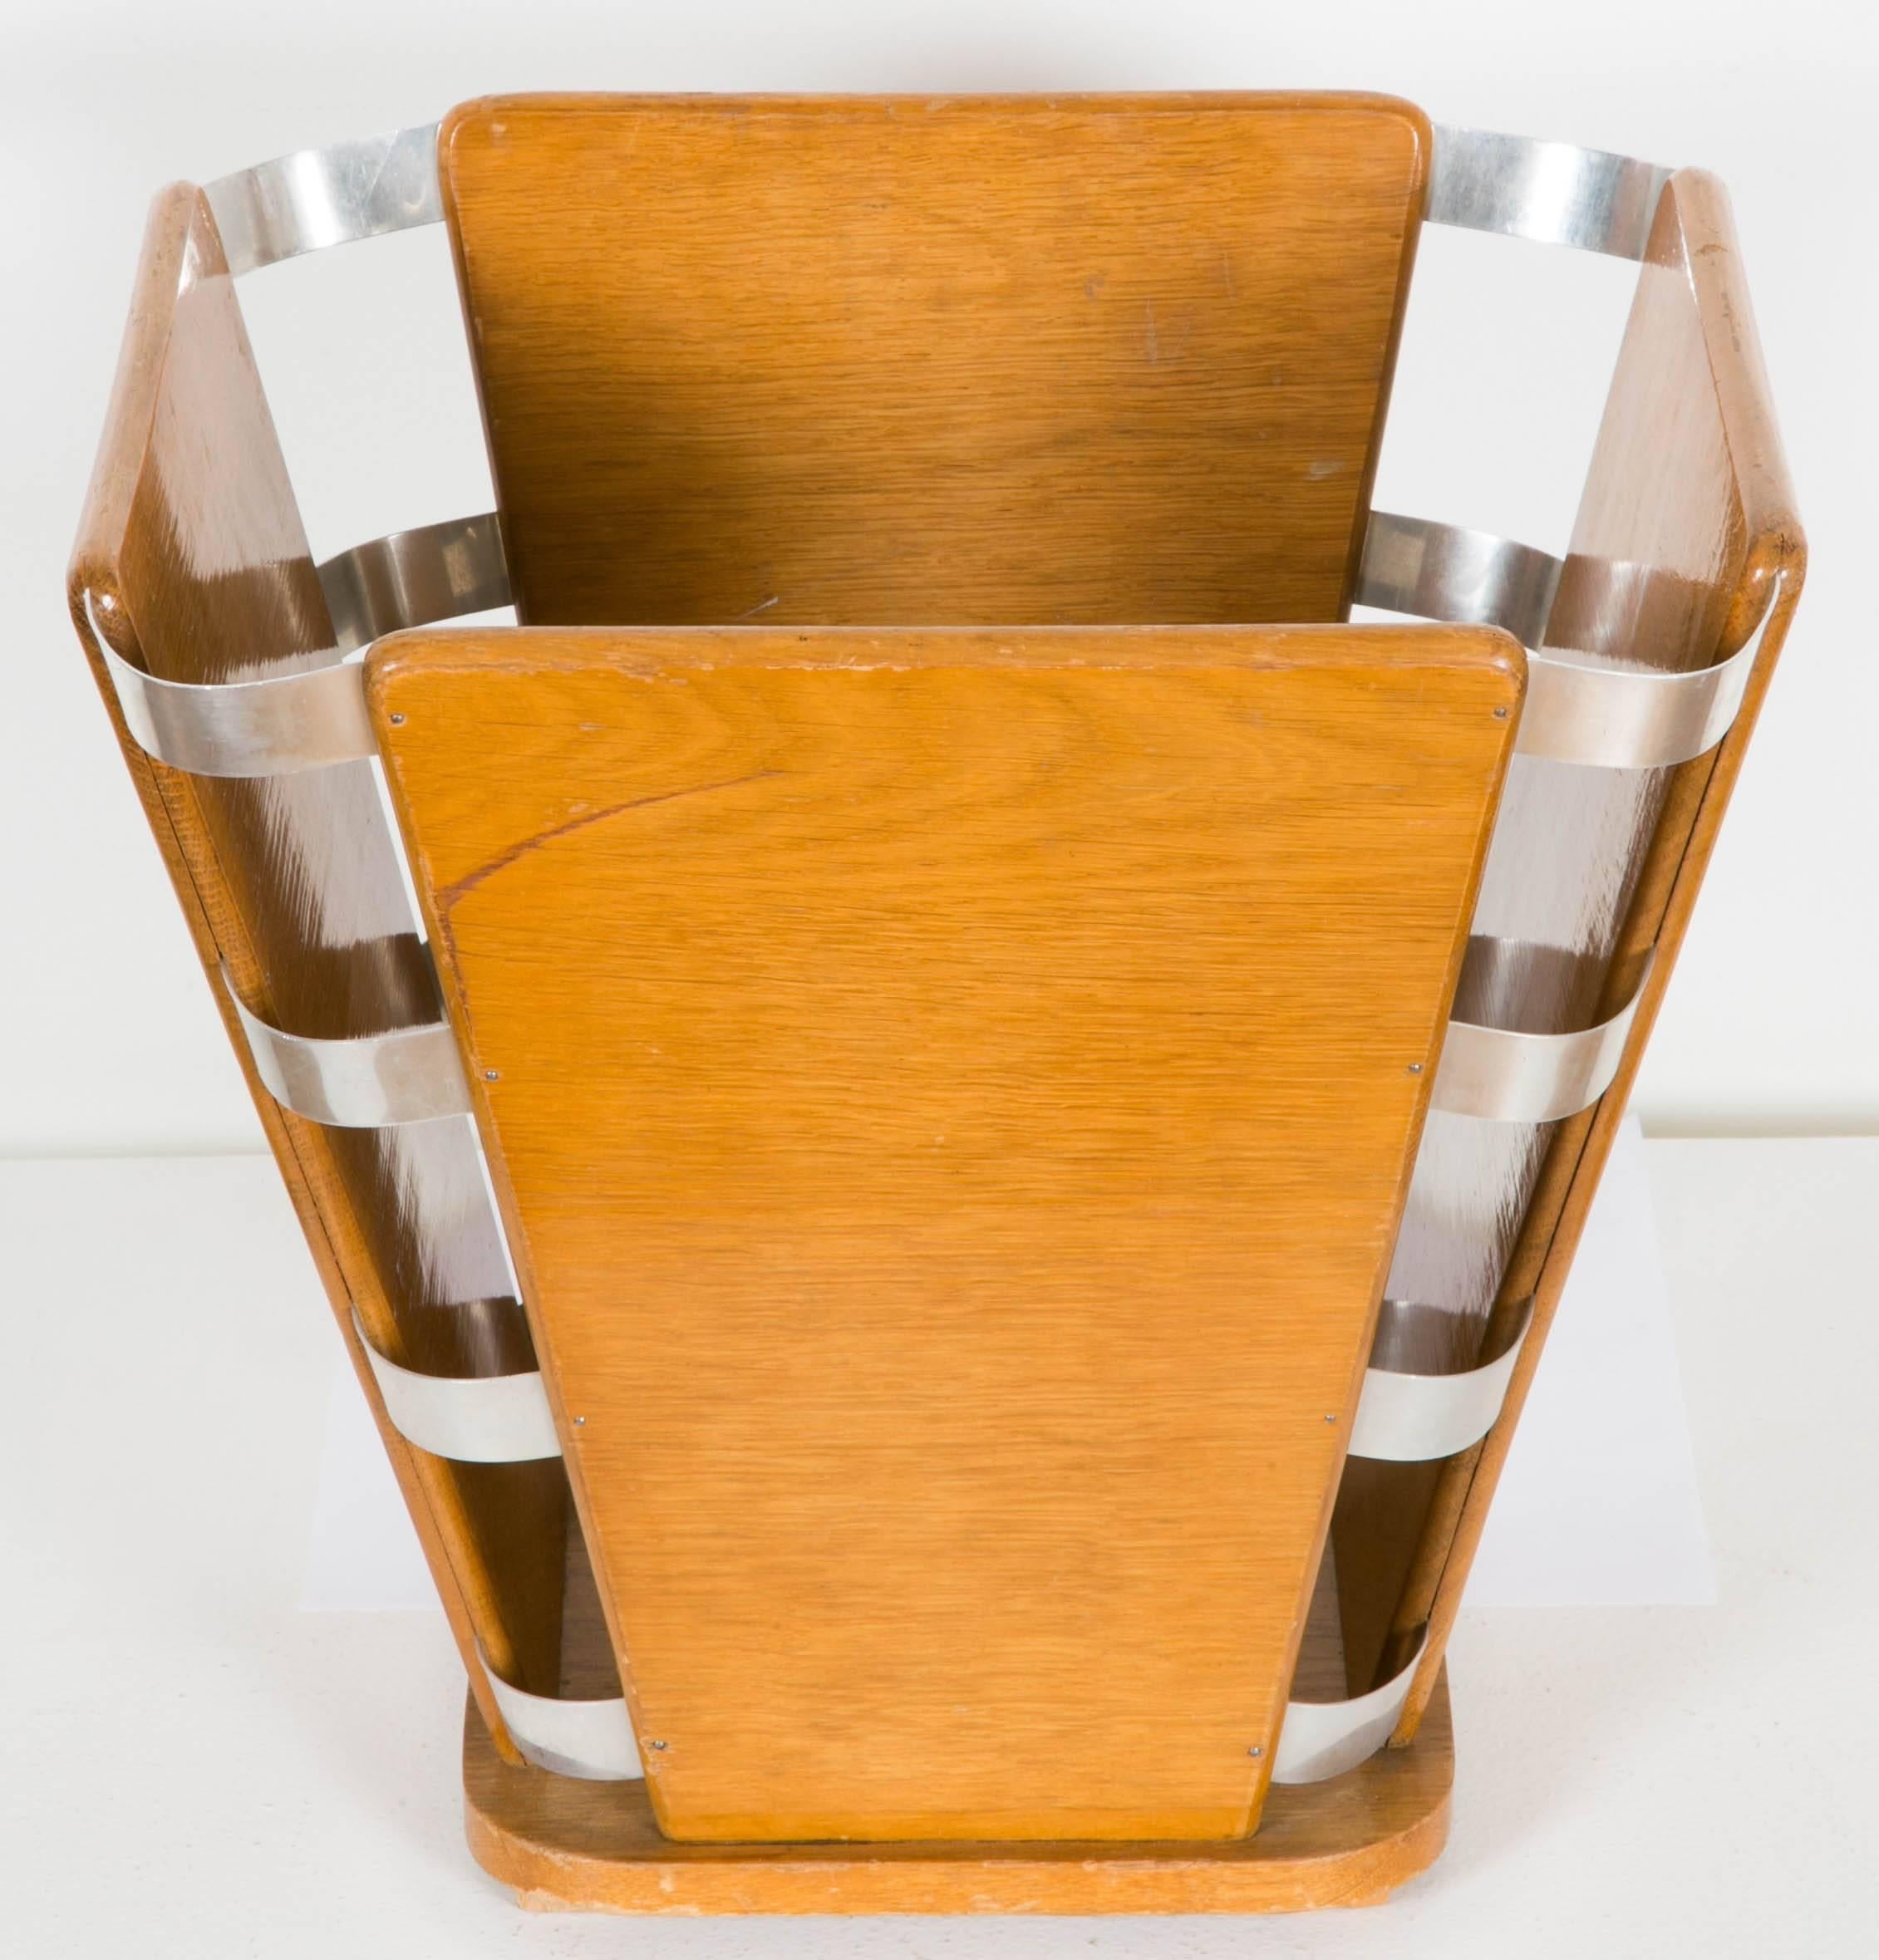 An art deco waste paper basket by Ruhlmann from the 1930s.
Plywood and chromium plated metal.